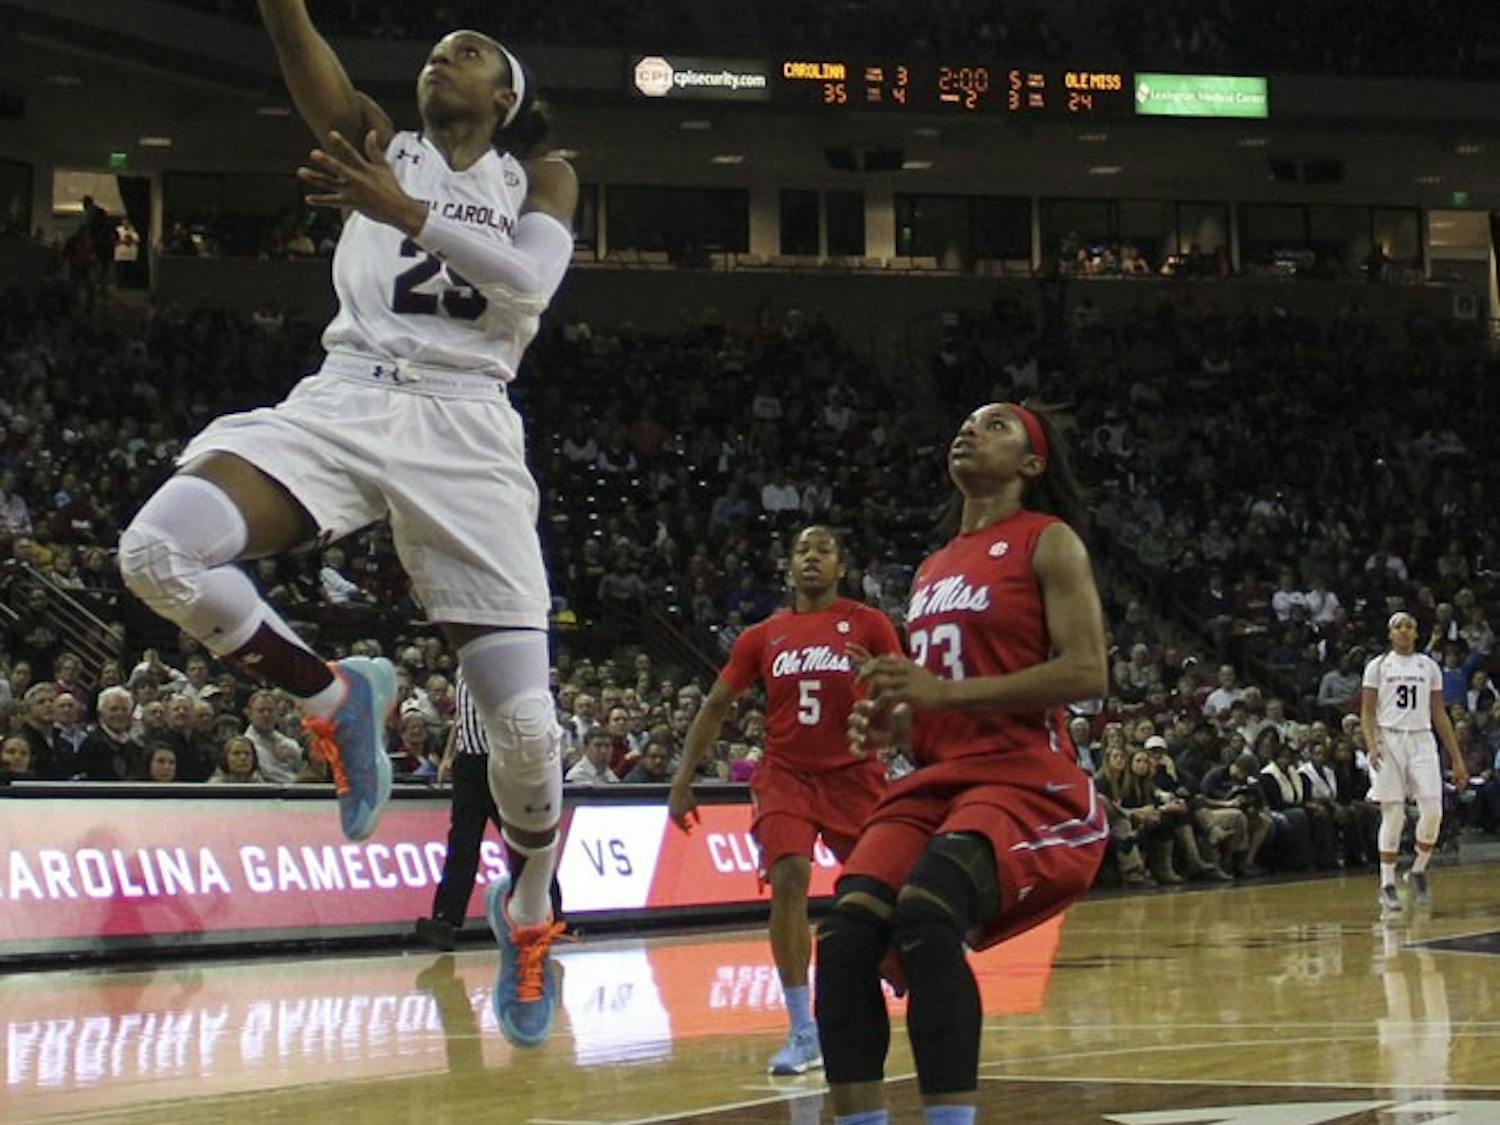 The Lady Gamecocks take home another win, beating Ole Miss 81-62.